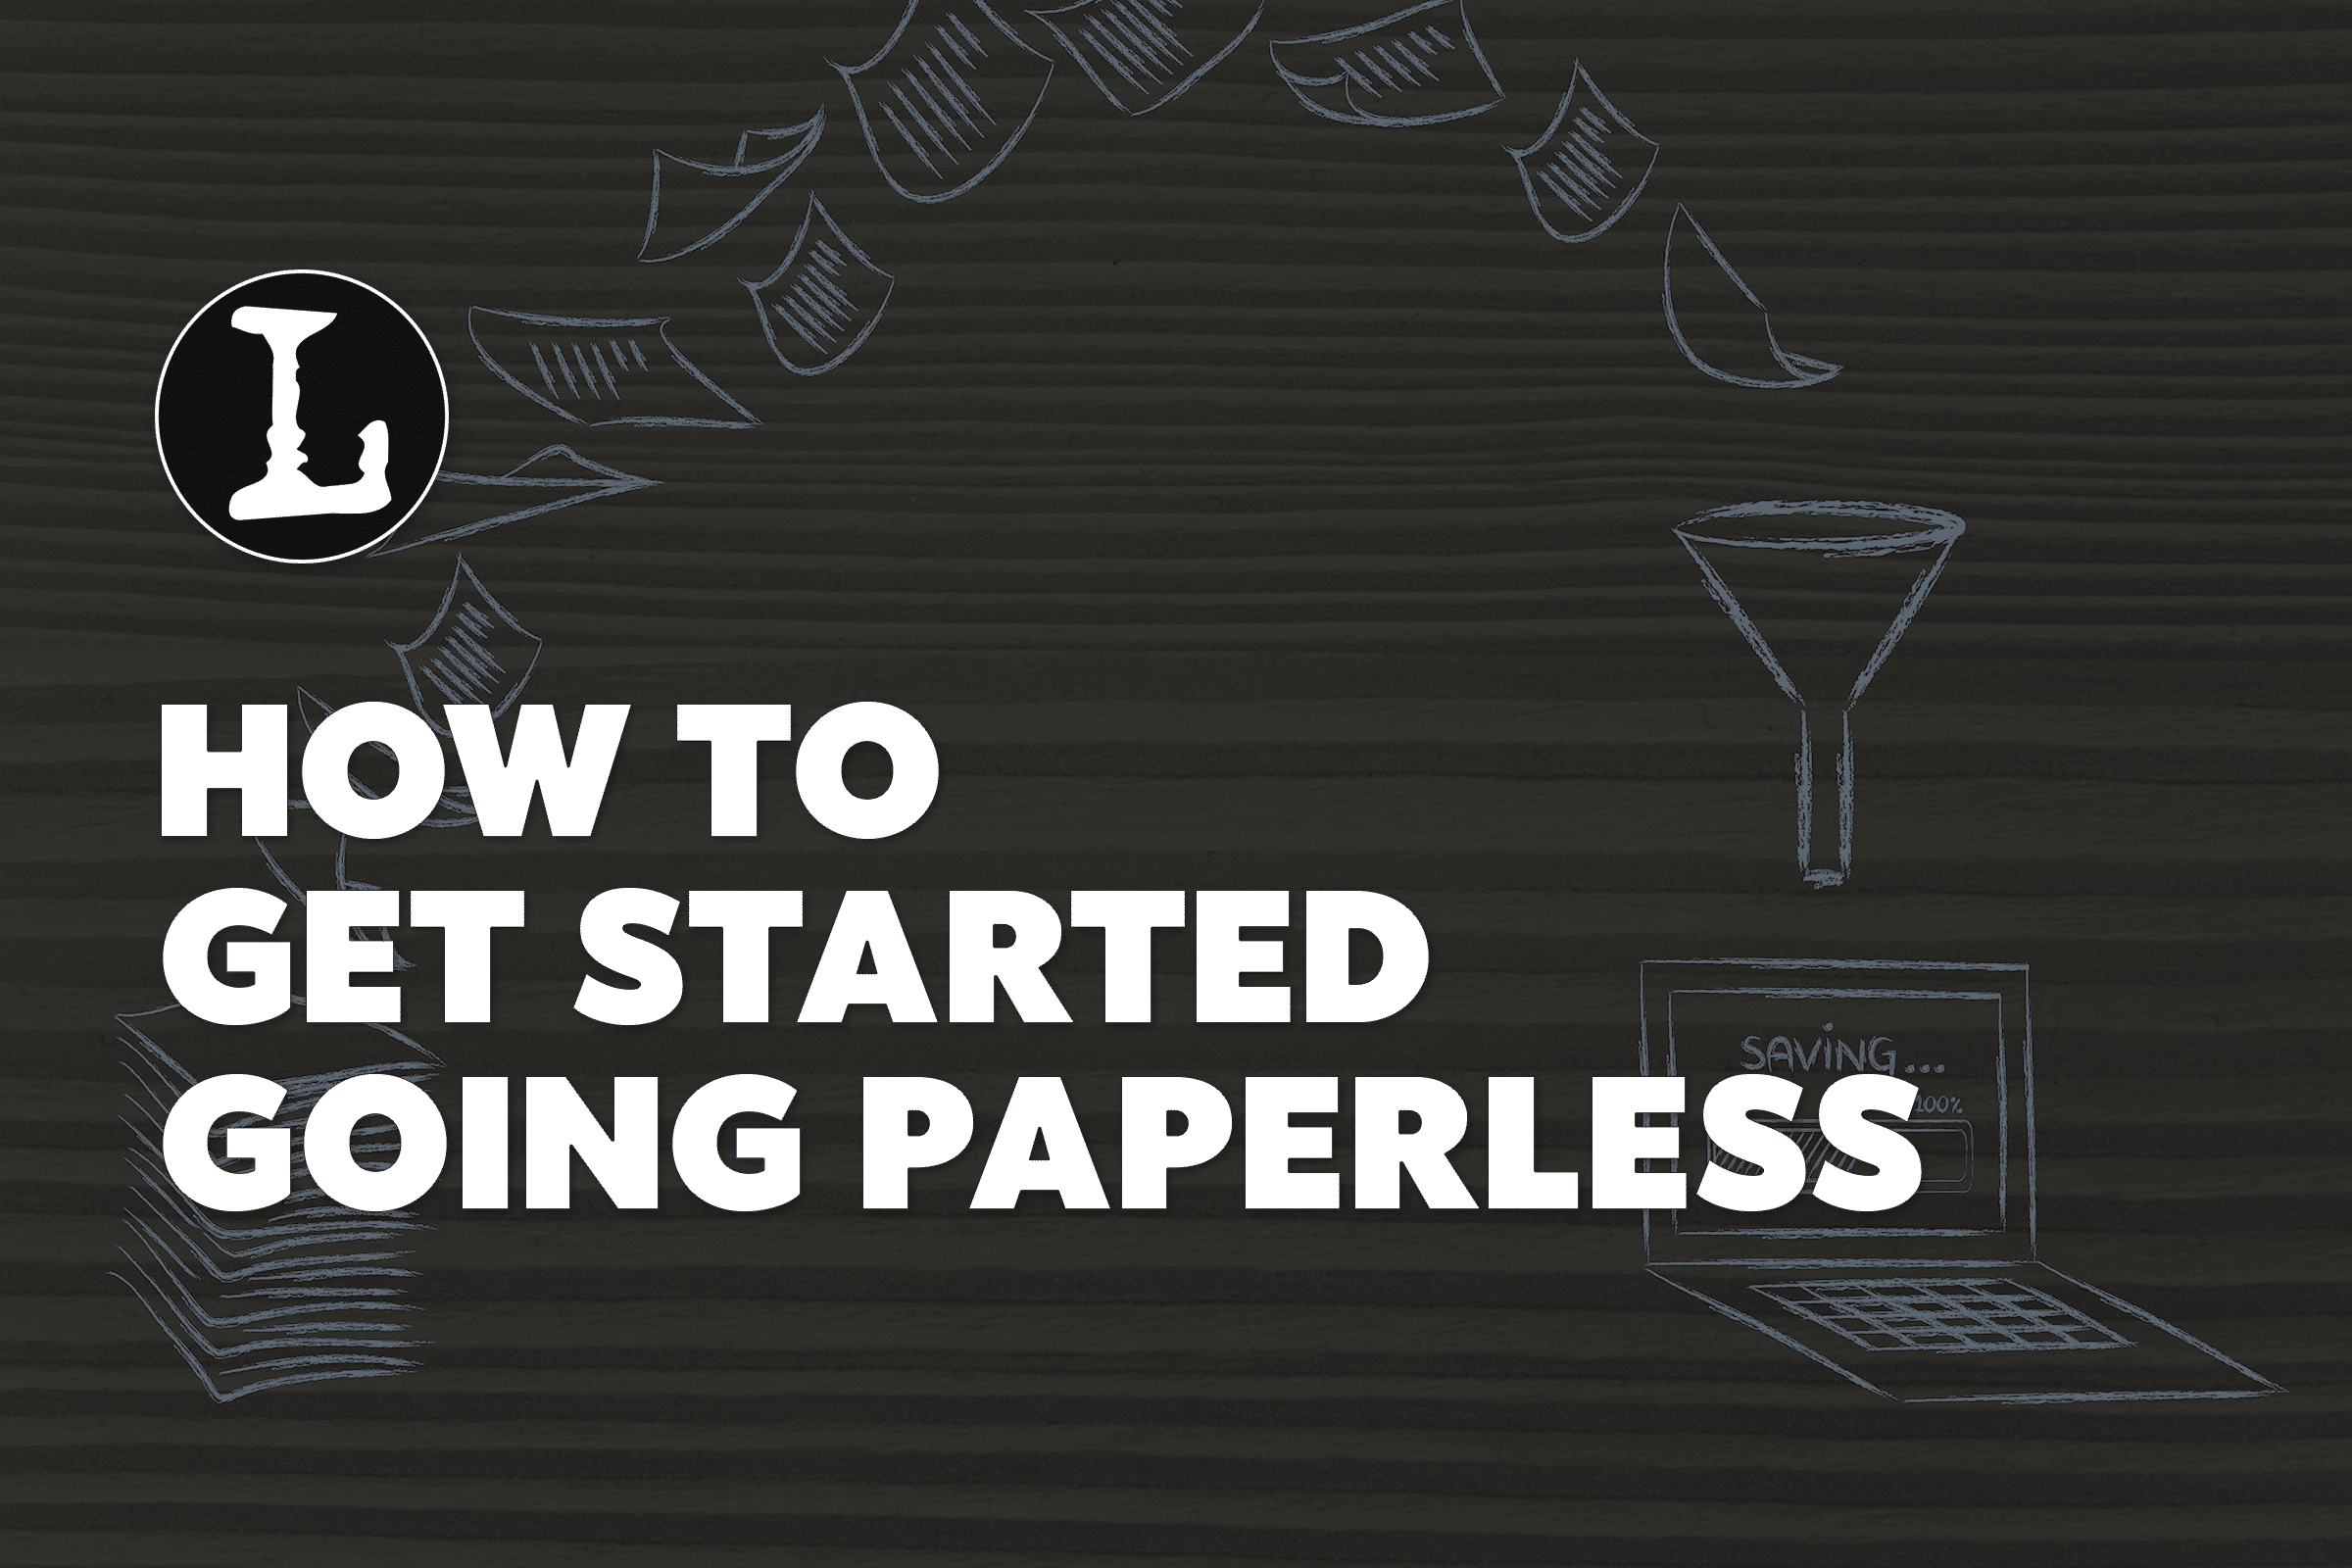 How to Get Started Going Paperless